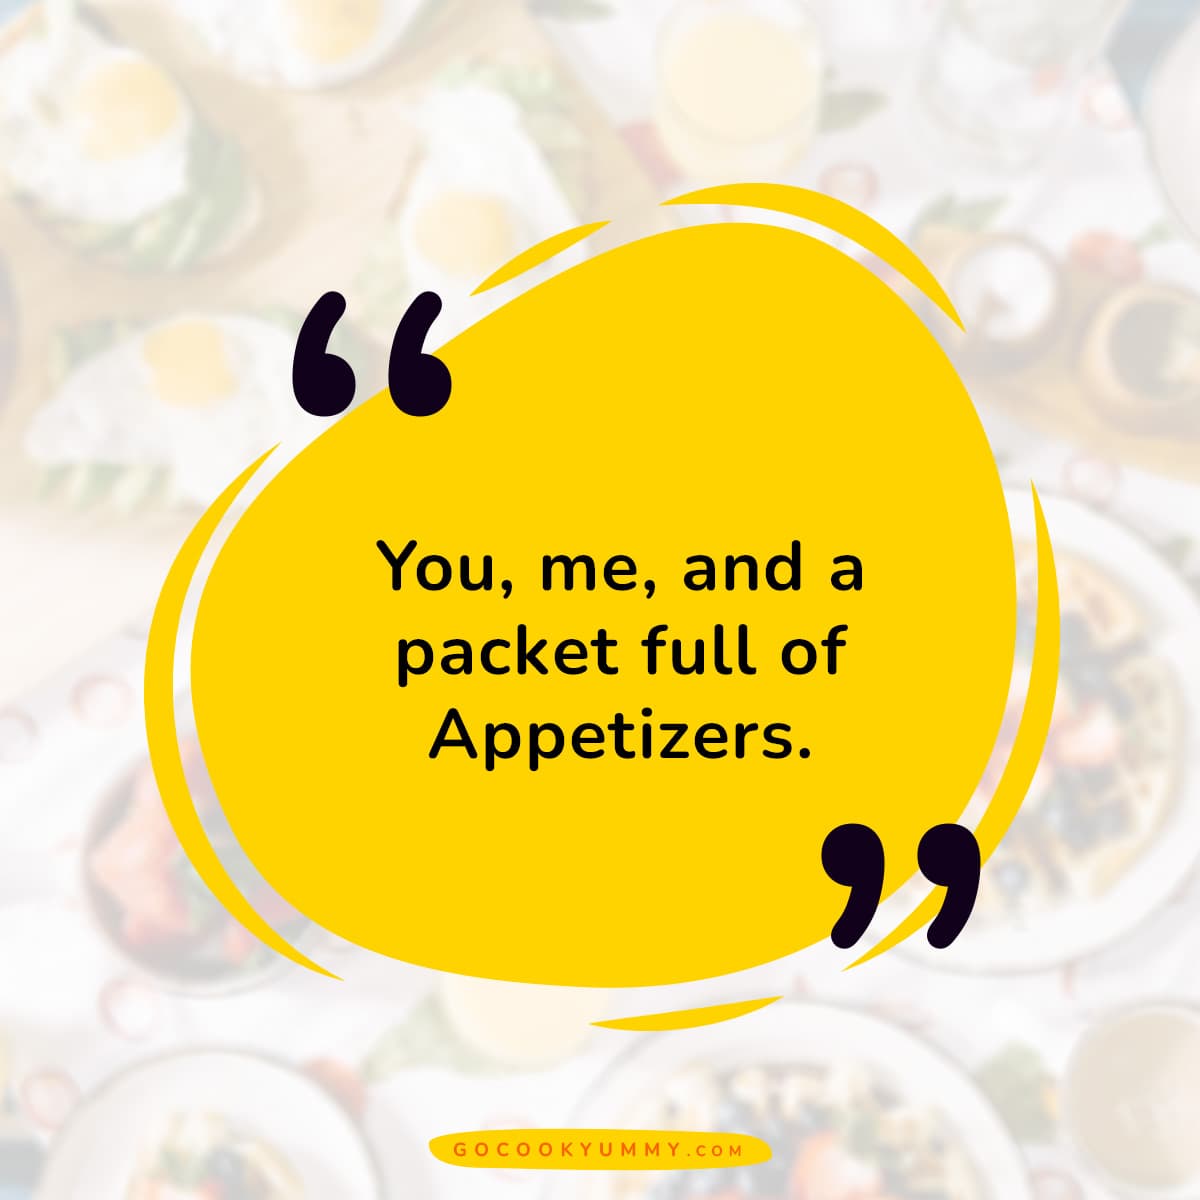 You, me, and a packet full of appetizers.